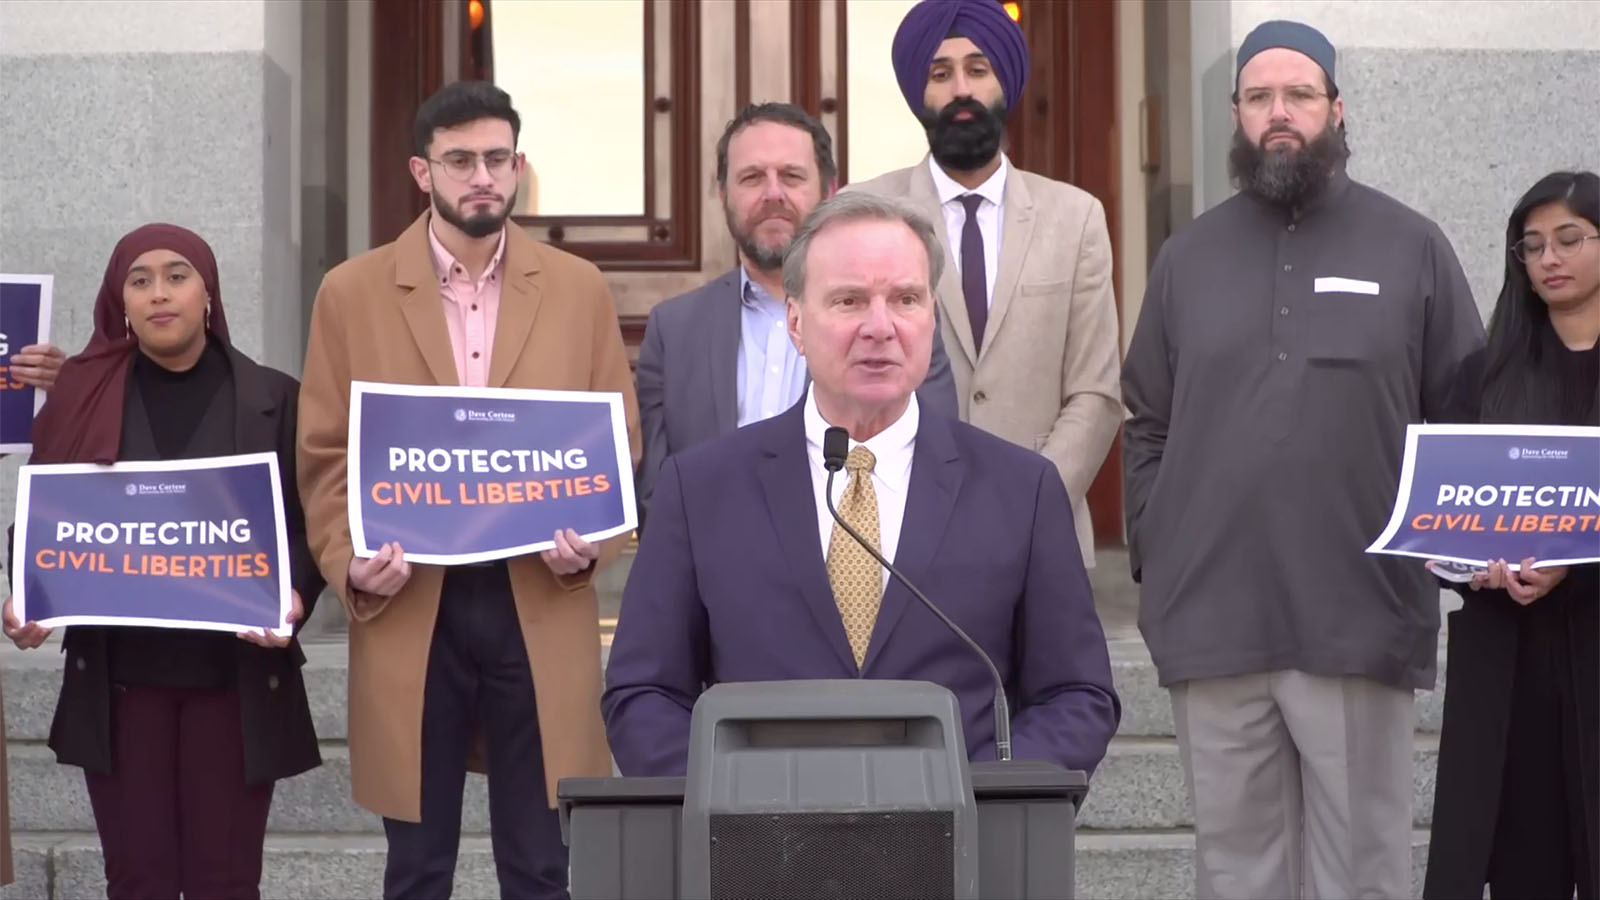 California State Senator Dave Cortese, joined by multi-faith leaders, unveils a bill that would create a statewide policy for religious clothing, headwear, and grooming practices among incarcerated individuals in state and local correctional and detention facilities, Monday, Feb. 6, 2023, in Sacramento, California. Video screen grab